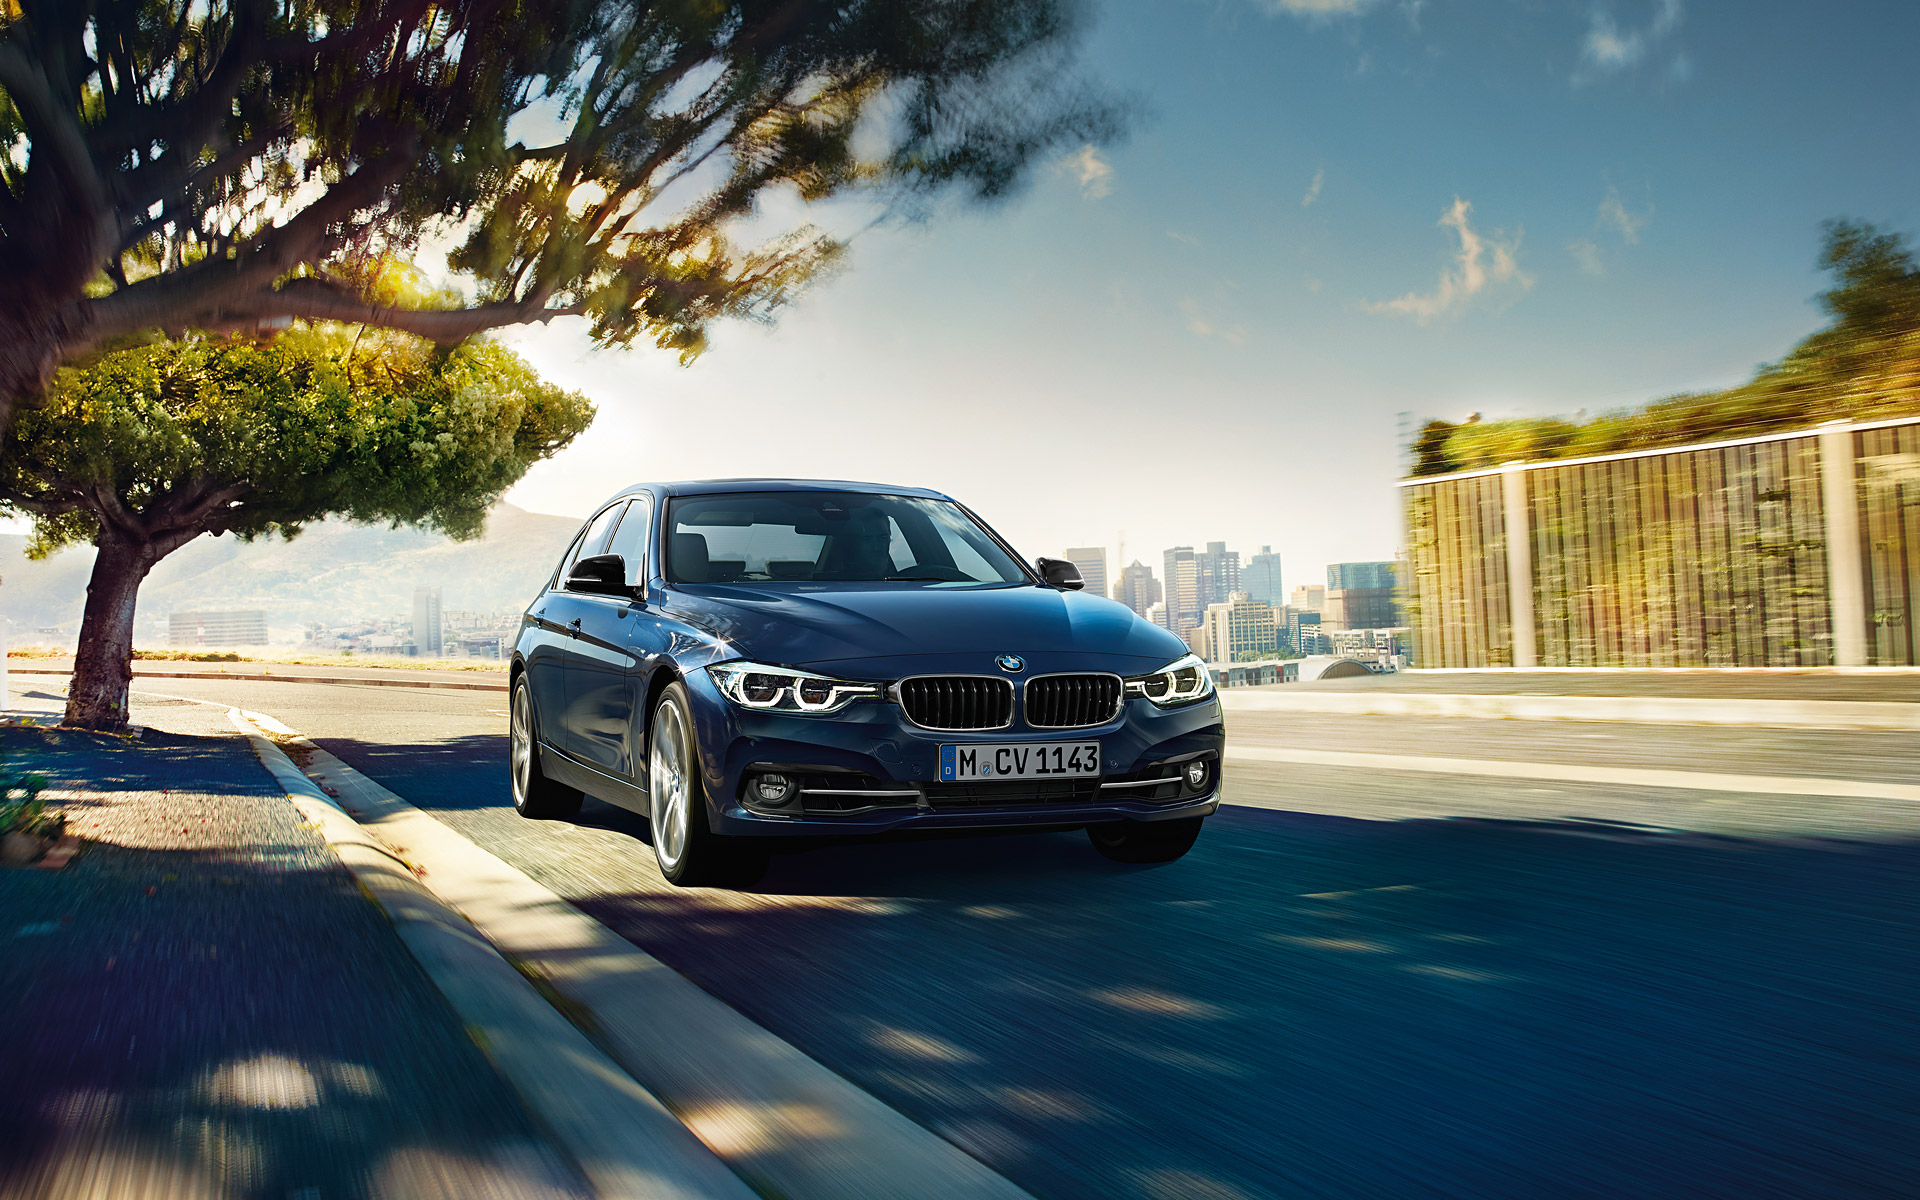 Bmw 328 Wallpapers